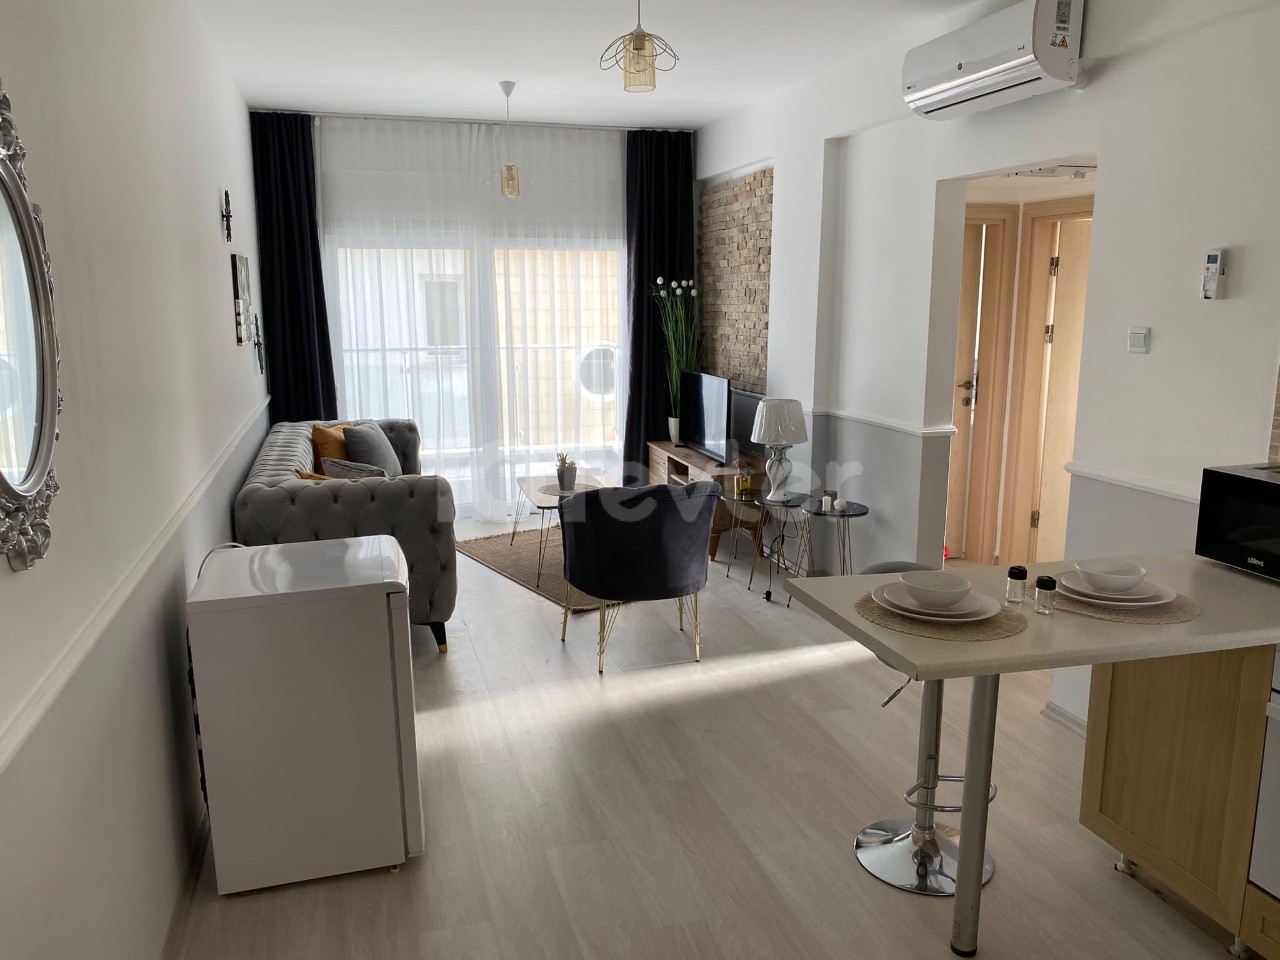 2+1 Fully Furnished Luxury Flat in Iskele Cesar with a Deposit Opportunity